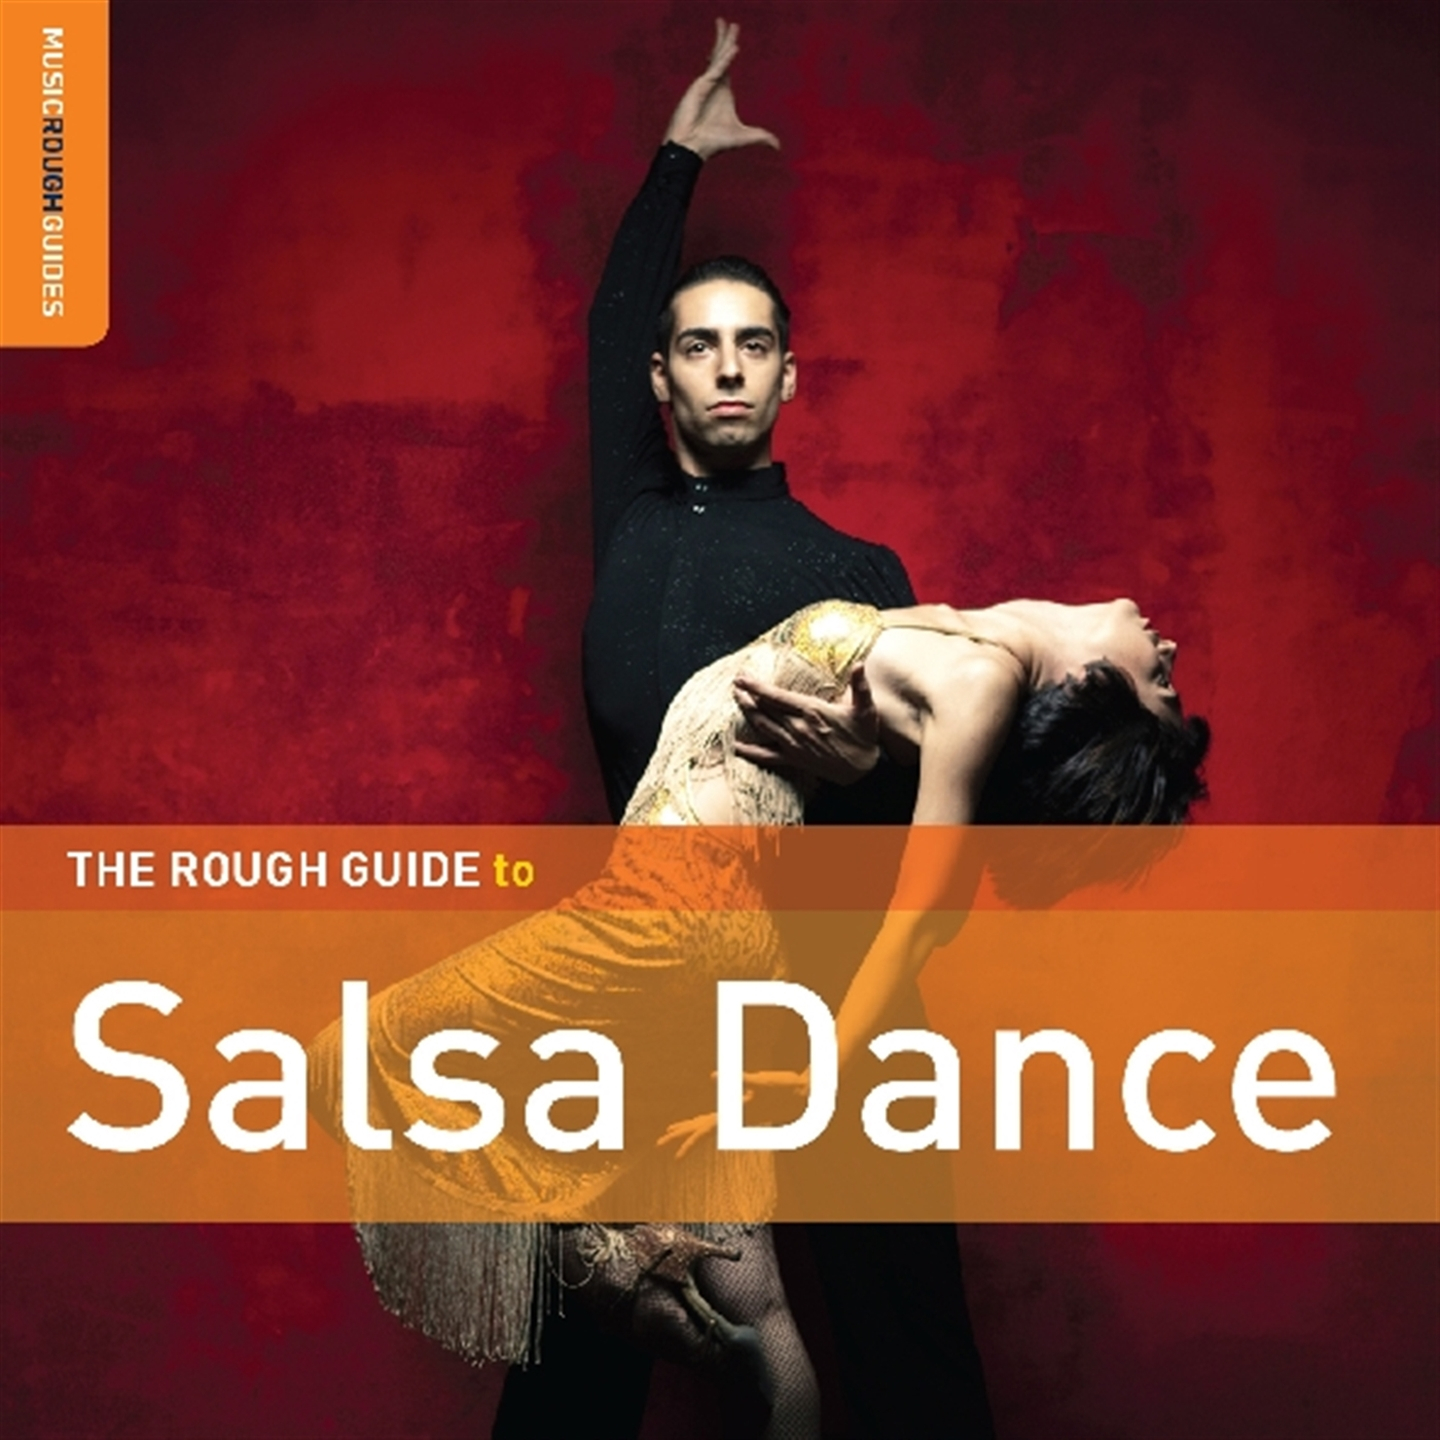 THE ROUGH GUIDE TO SALSA DANCE [SPECIAL EDITION]